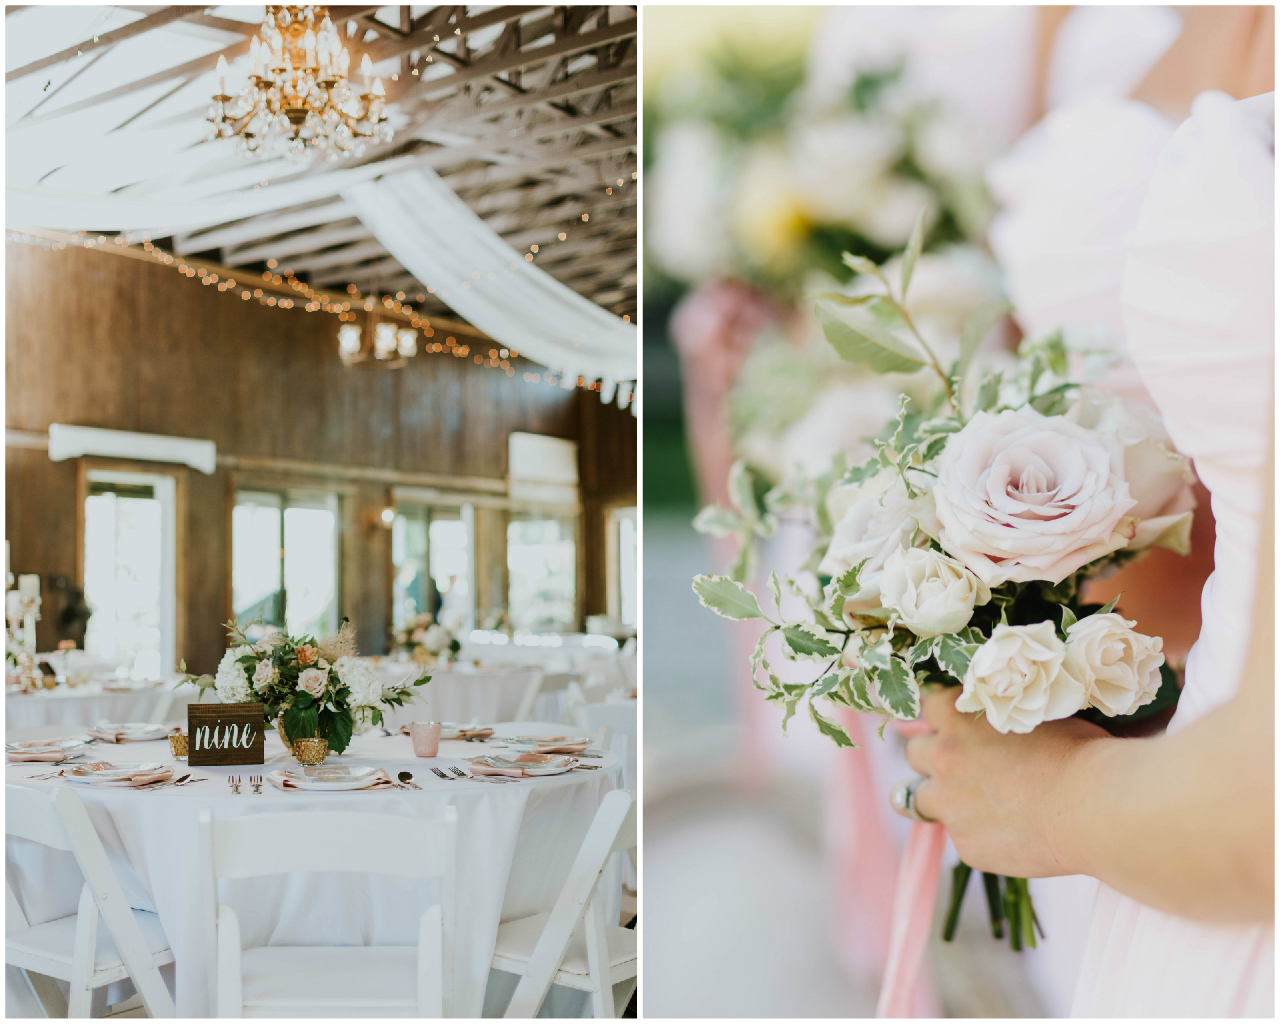 Rustic Blush Wedding | The Day's Design | Katie Grace Photography